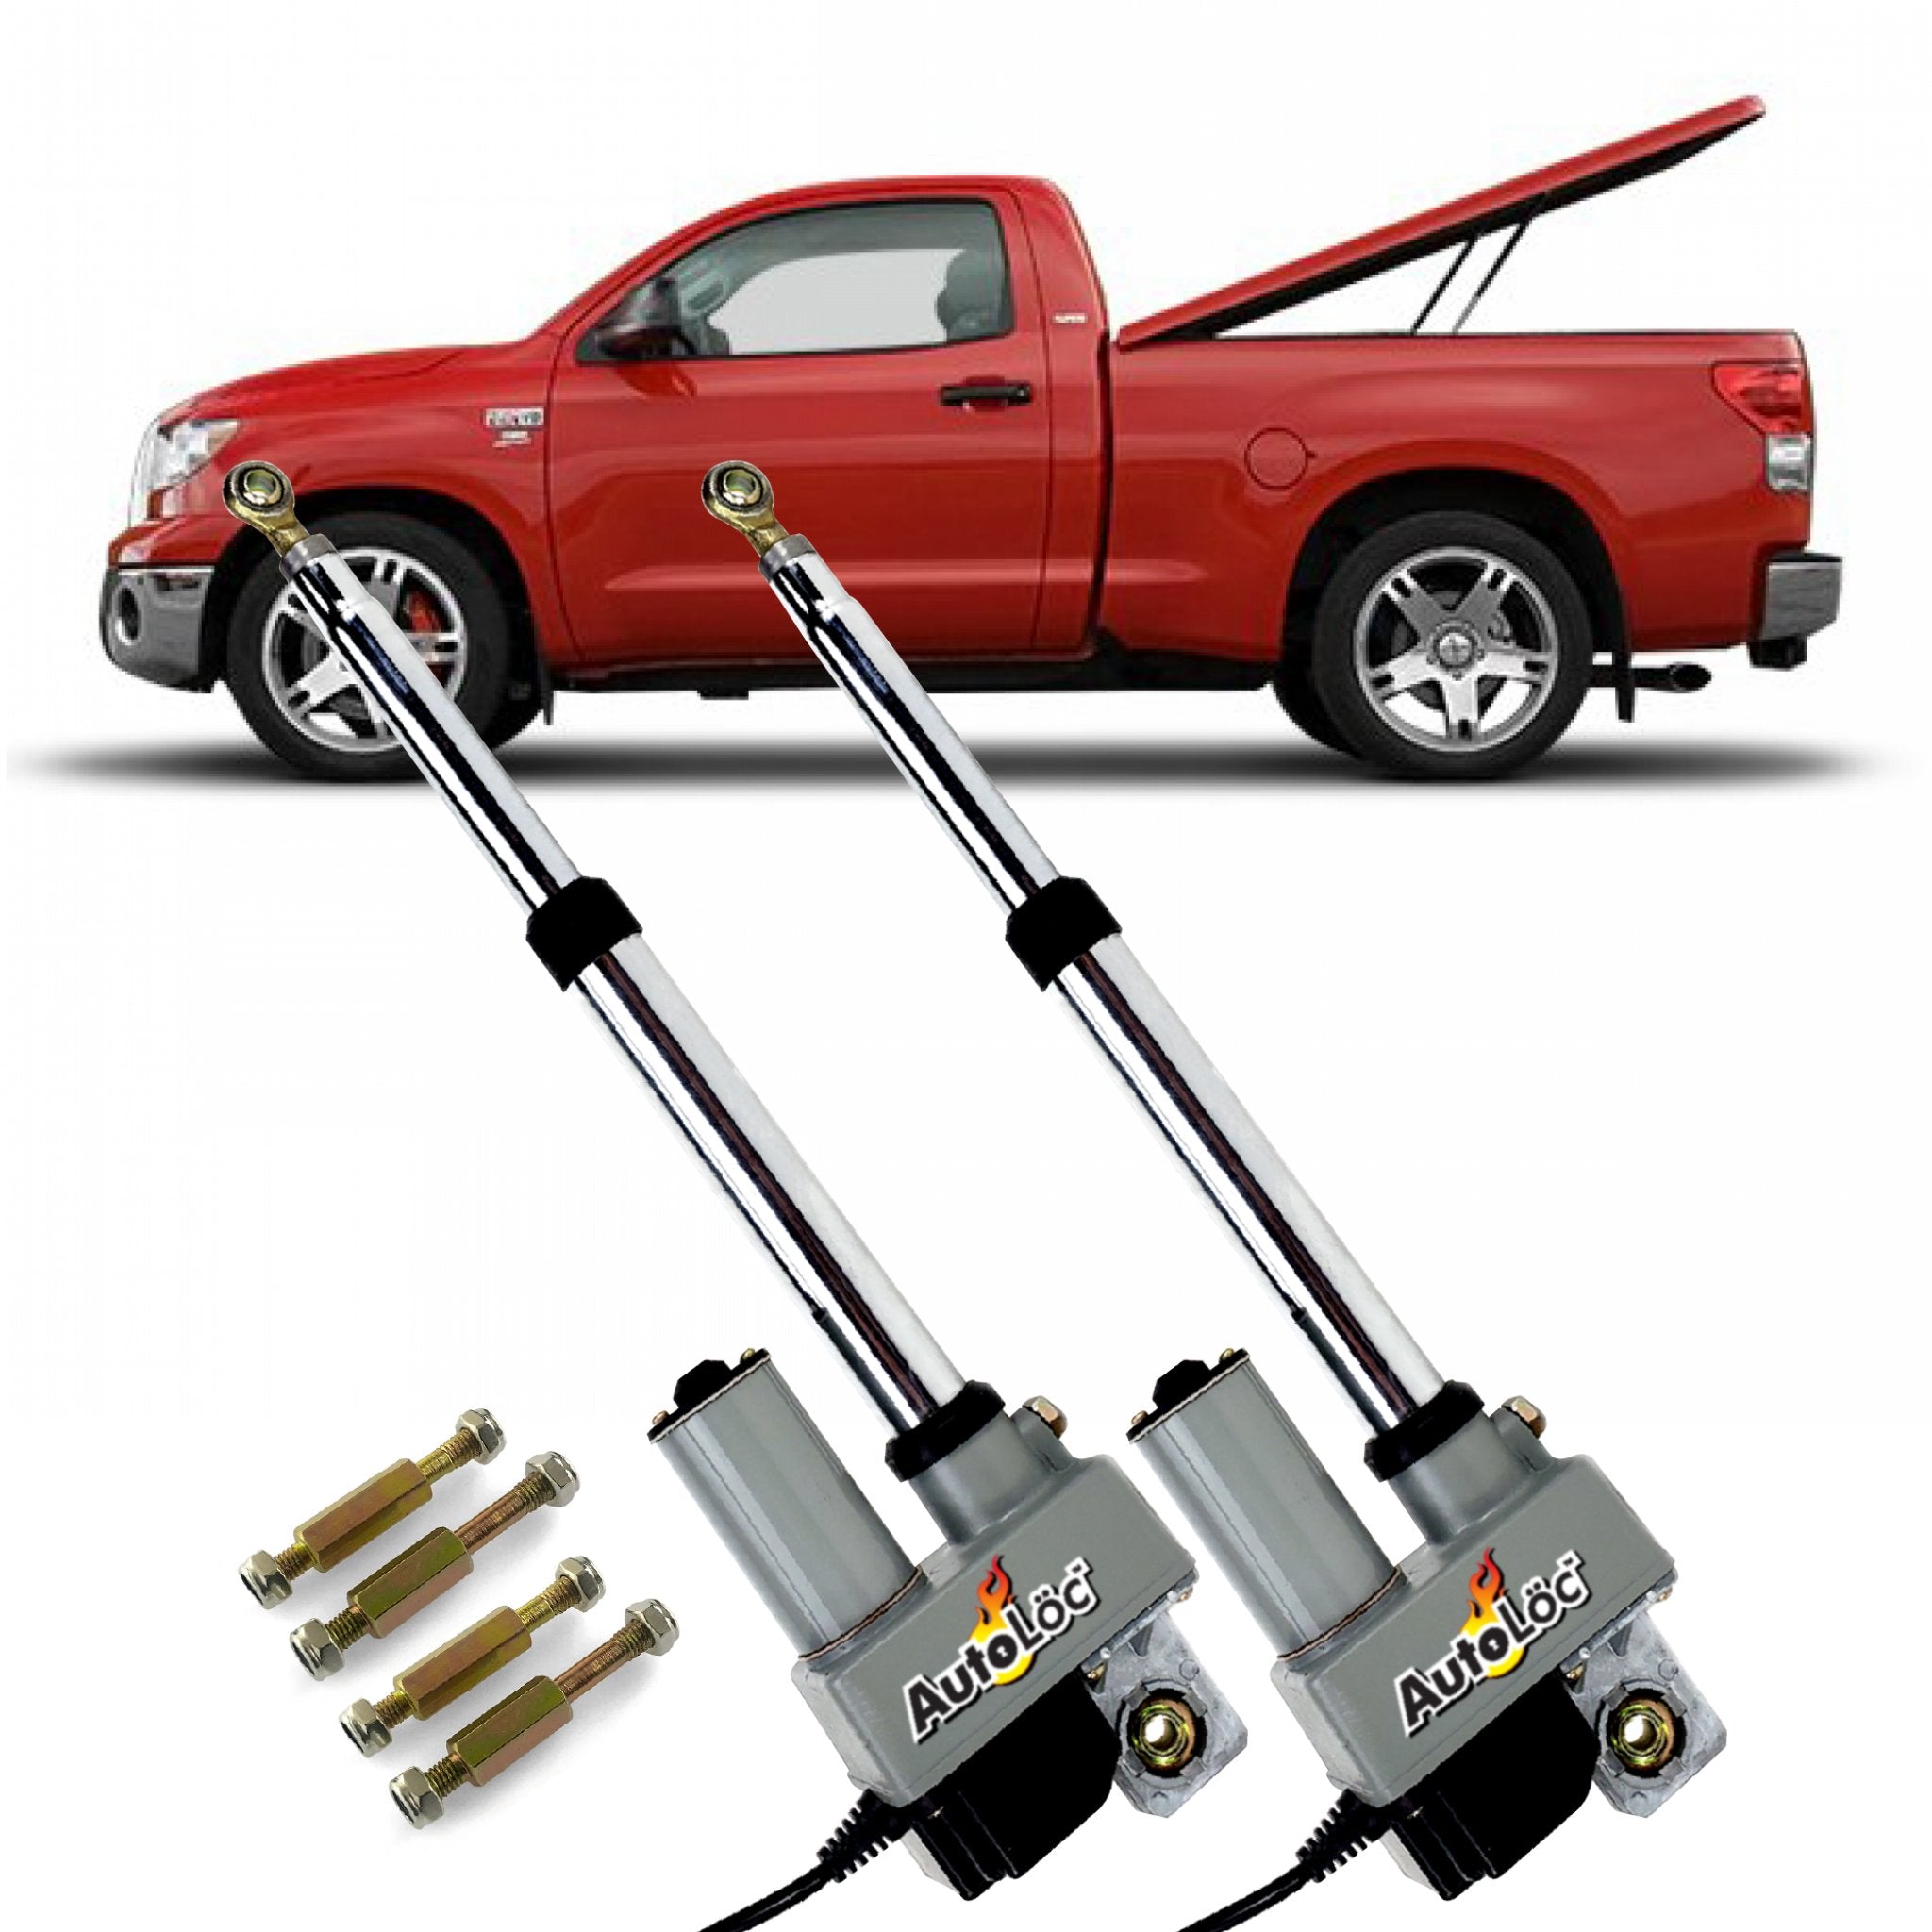 12V Automated Truck Power Tonneau Cover Open Lift Kit w/ 2 Linear Actuator Motor